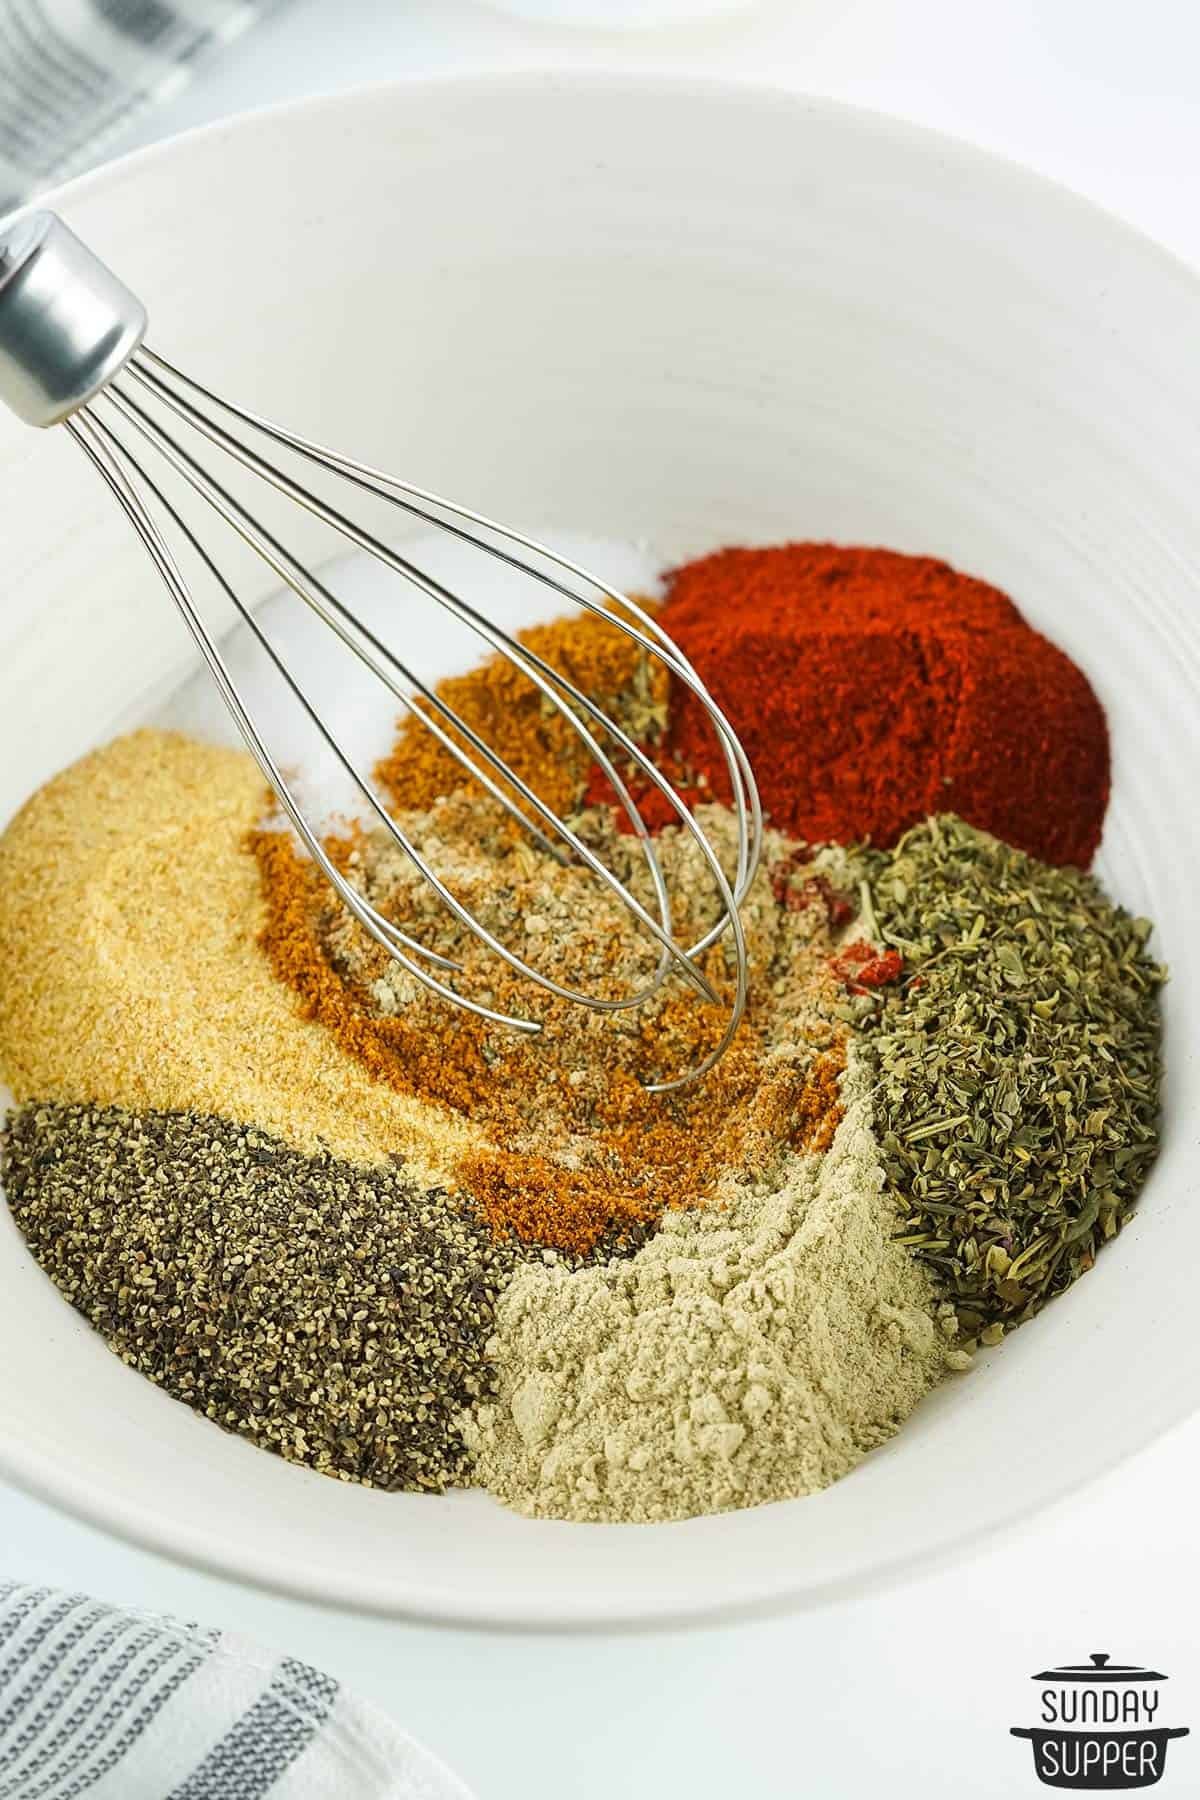 the seasonings being whisked in a bowl